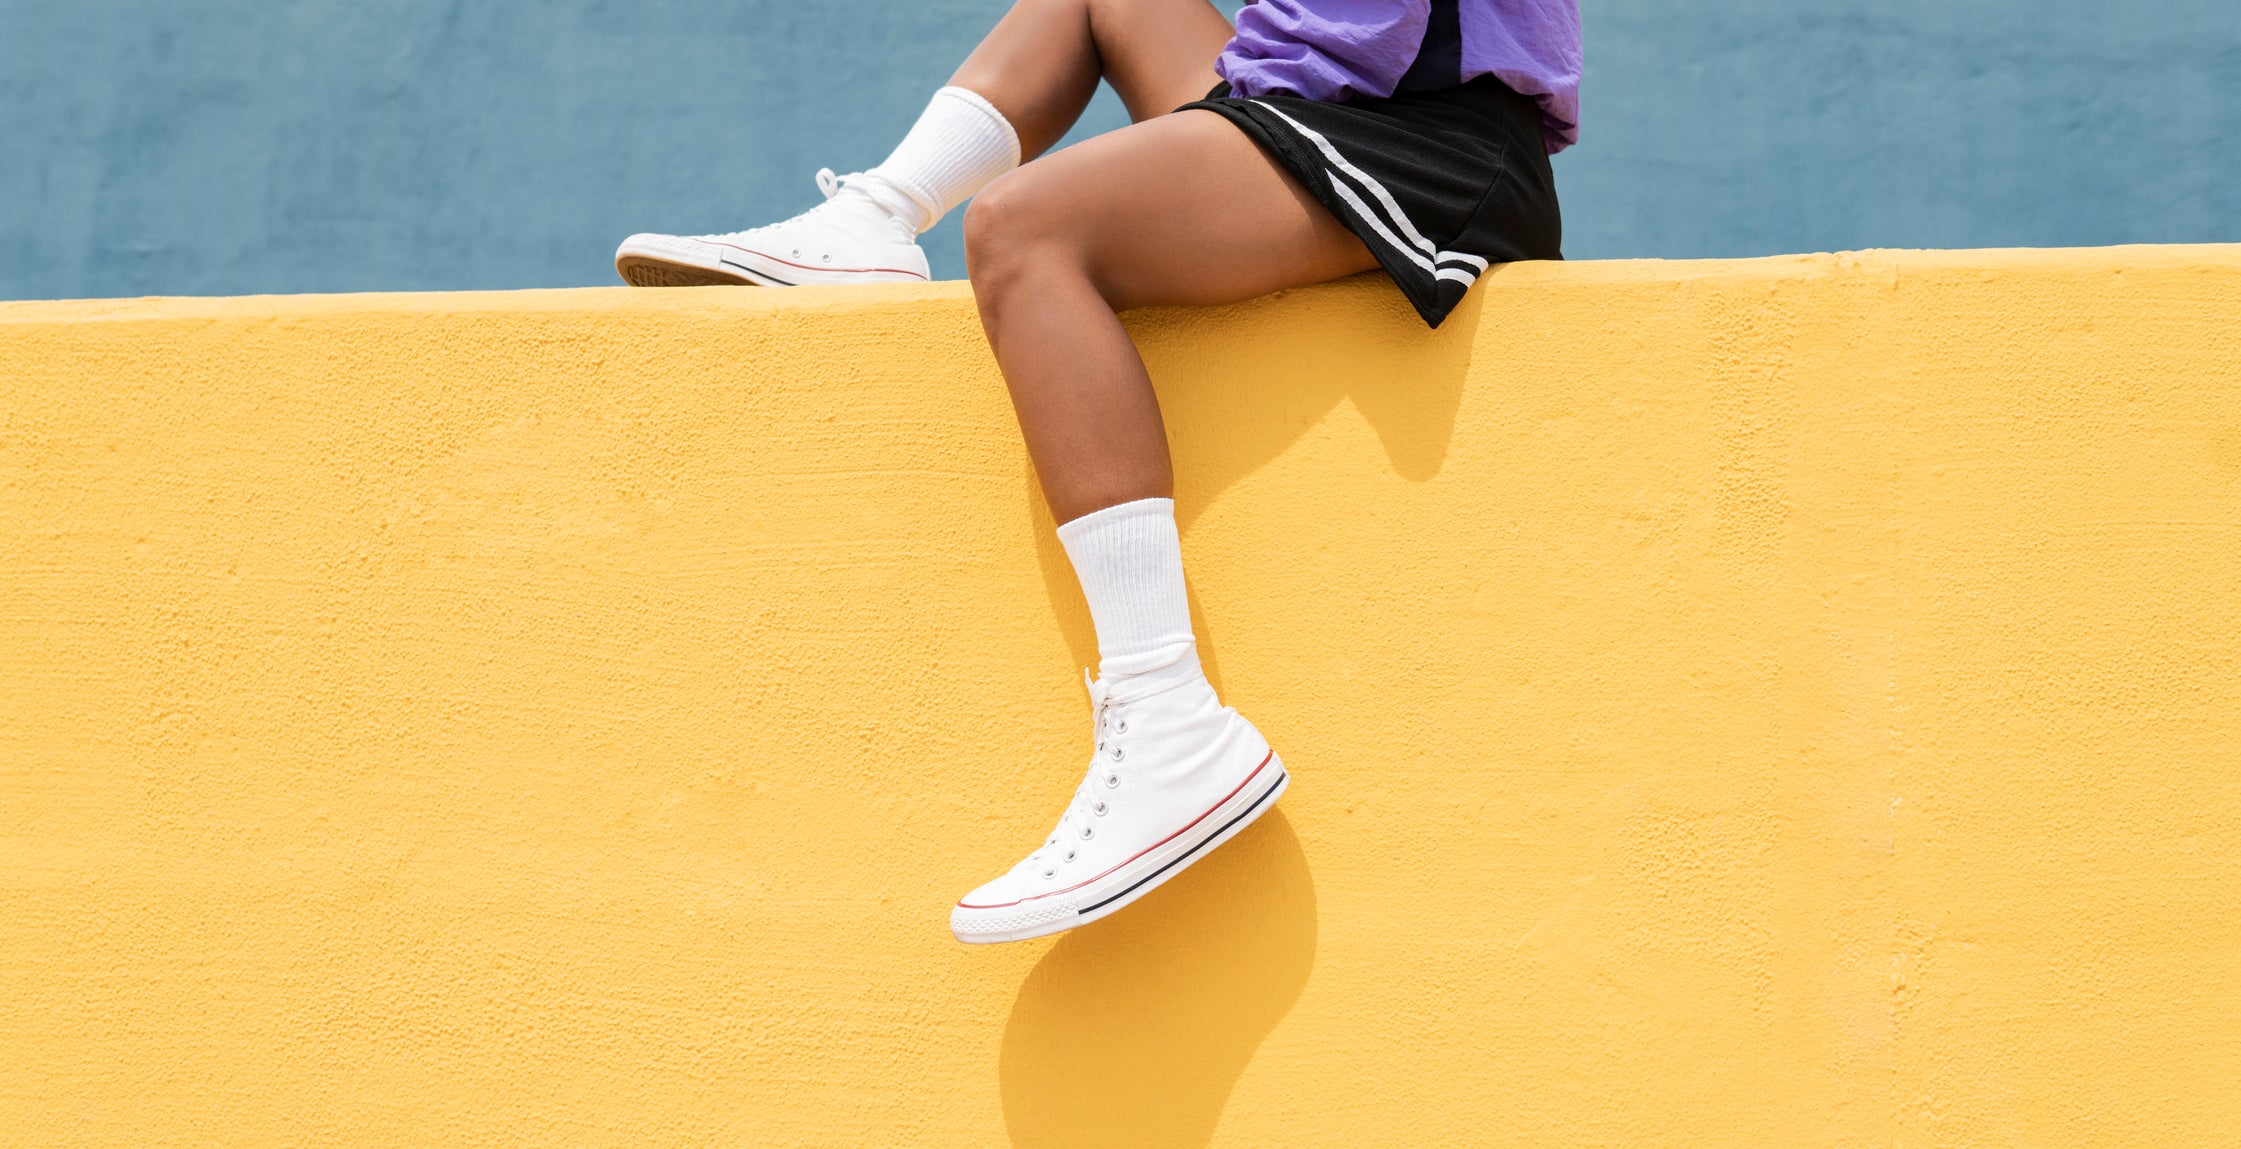 PUMA - Selena Gomez switching up her workout and her style in one fun  trainer. The DEFY Mid is coming soon to India. #DoYou